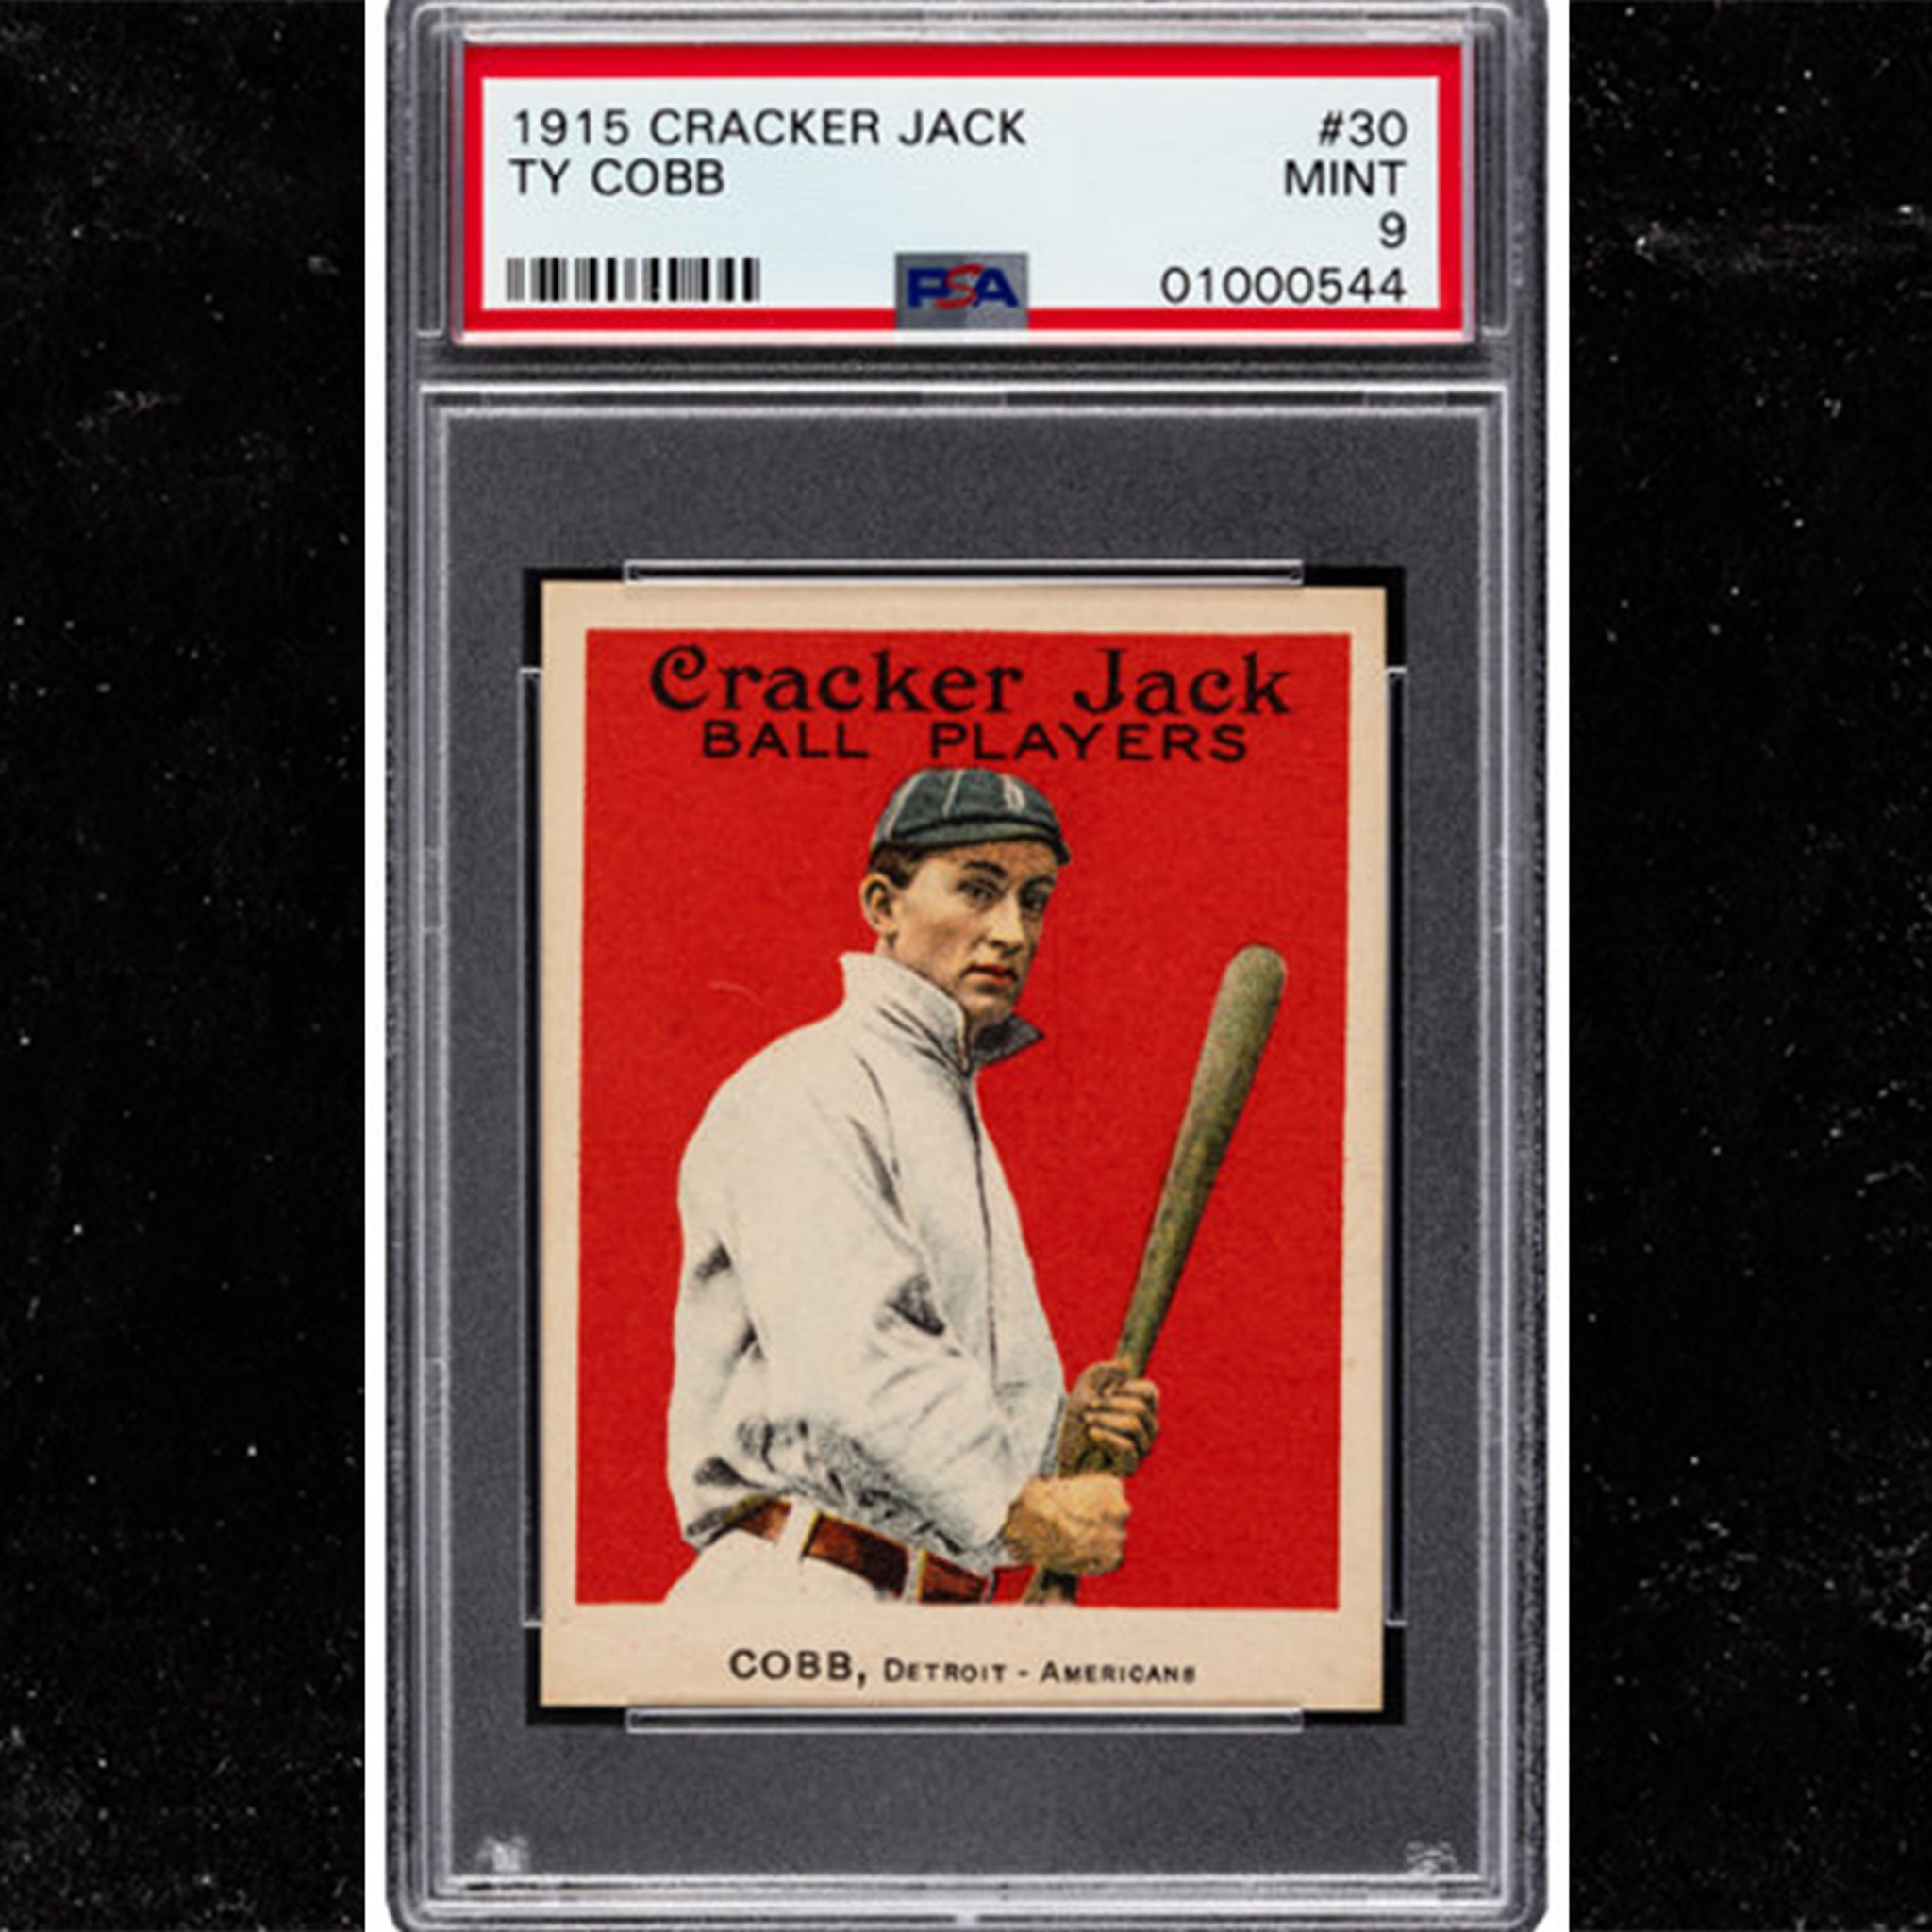 Extremely Rare Ty Cobb Baseball Card From 1915 Sells For $504K